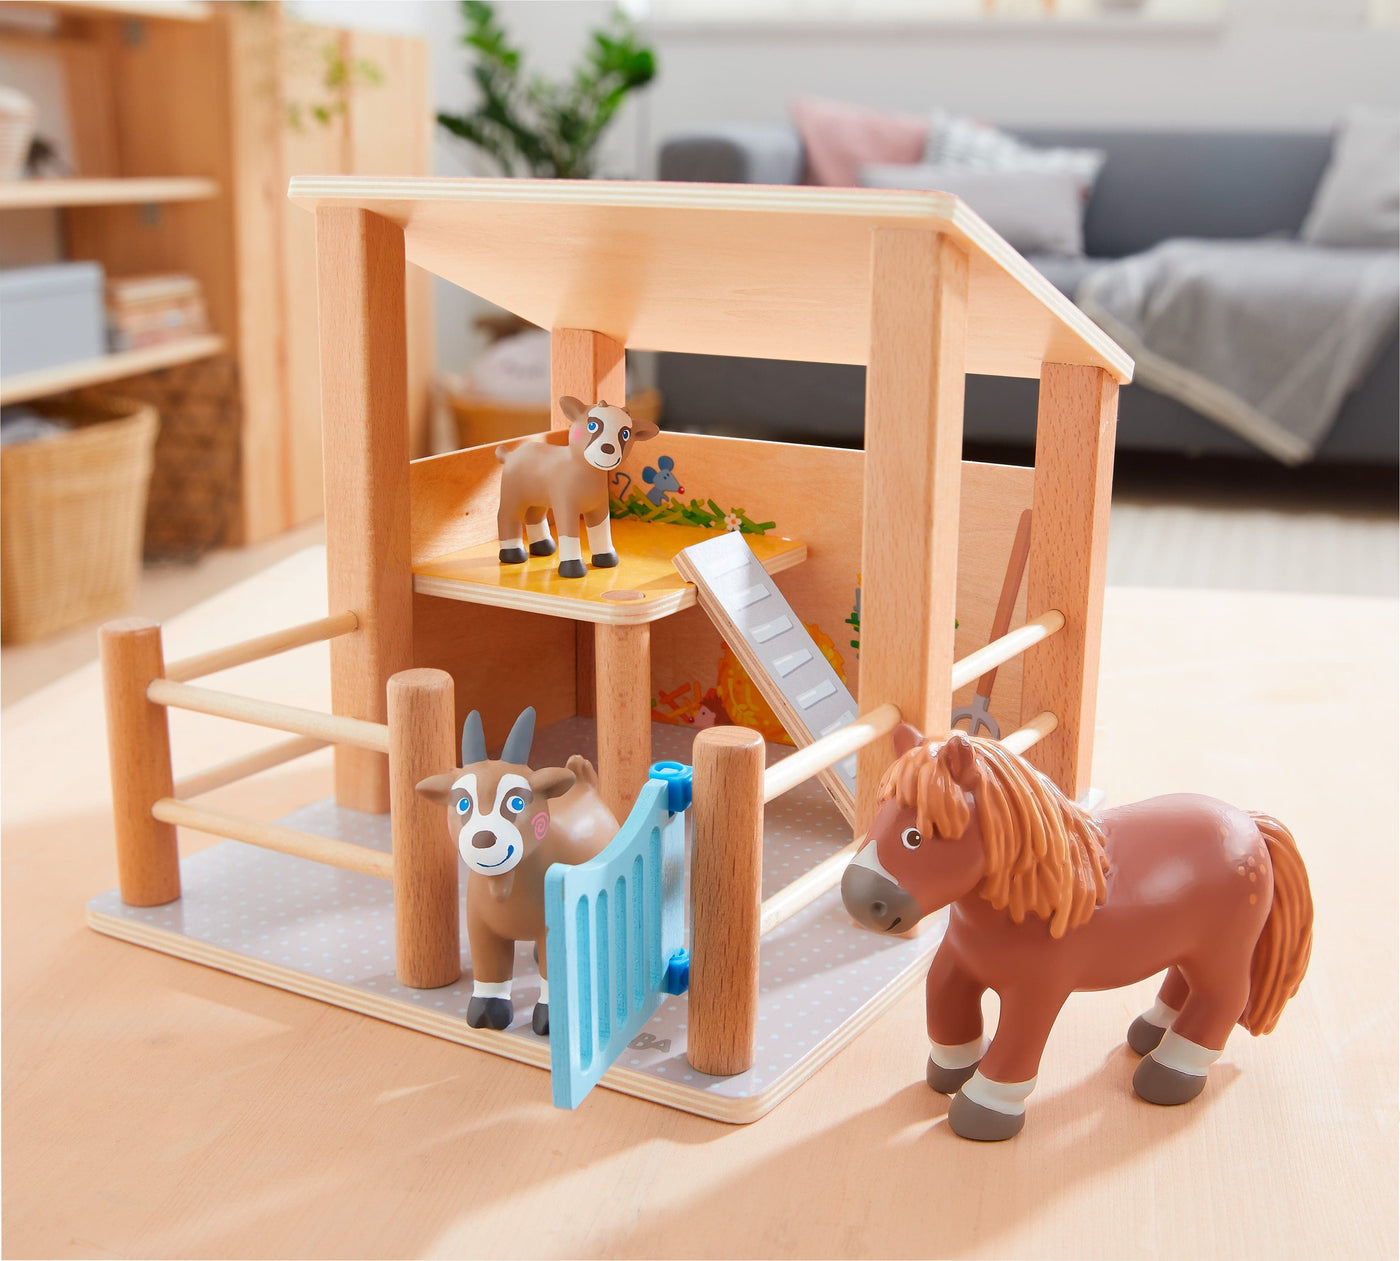 HABA Little Friends Petting Zoo with Farm Animals